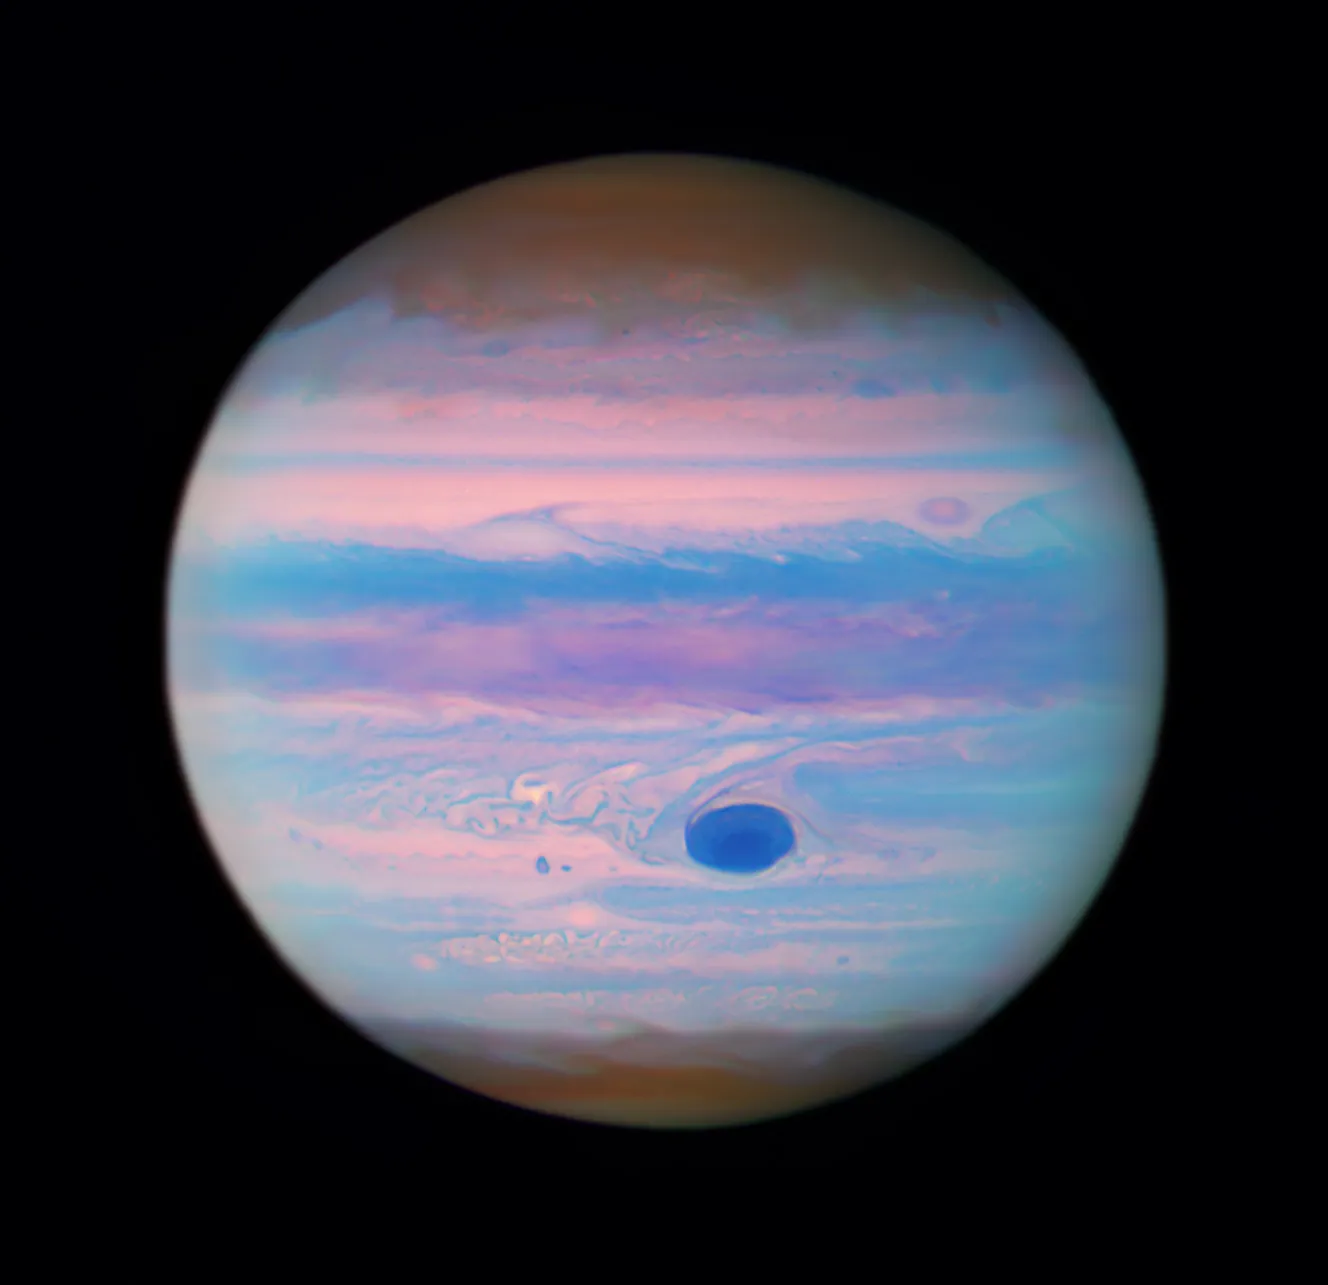 NASA's Hubble Space Telescope Unveils Unique View of Jupiter in Ultraviolet Light